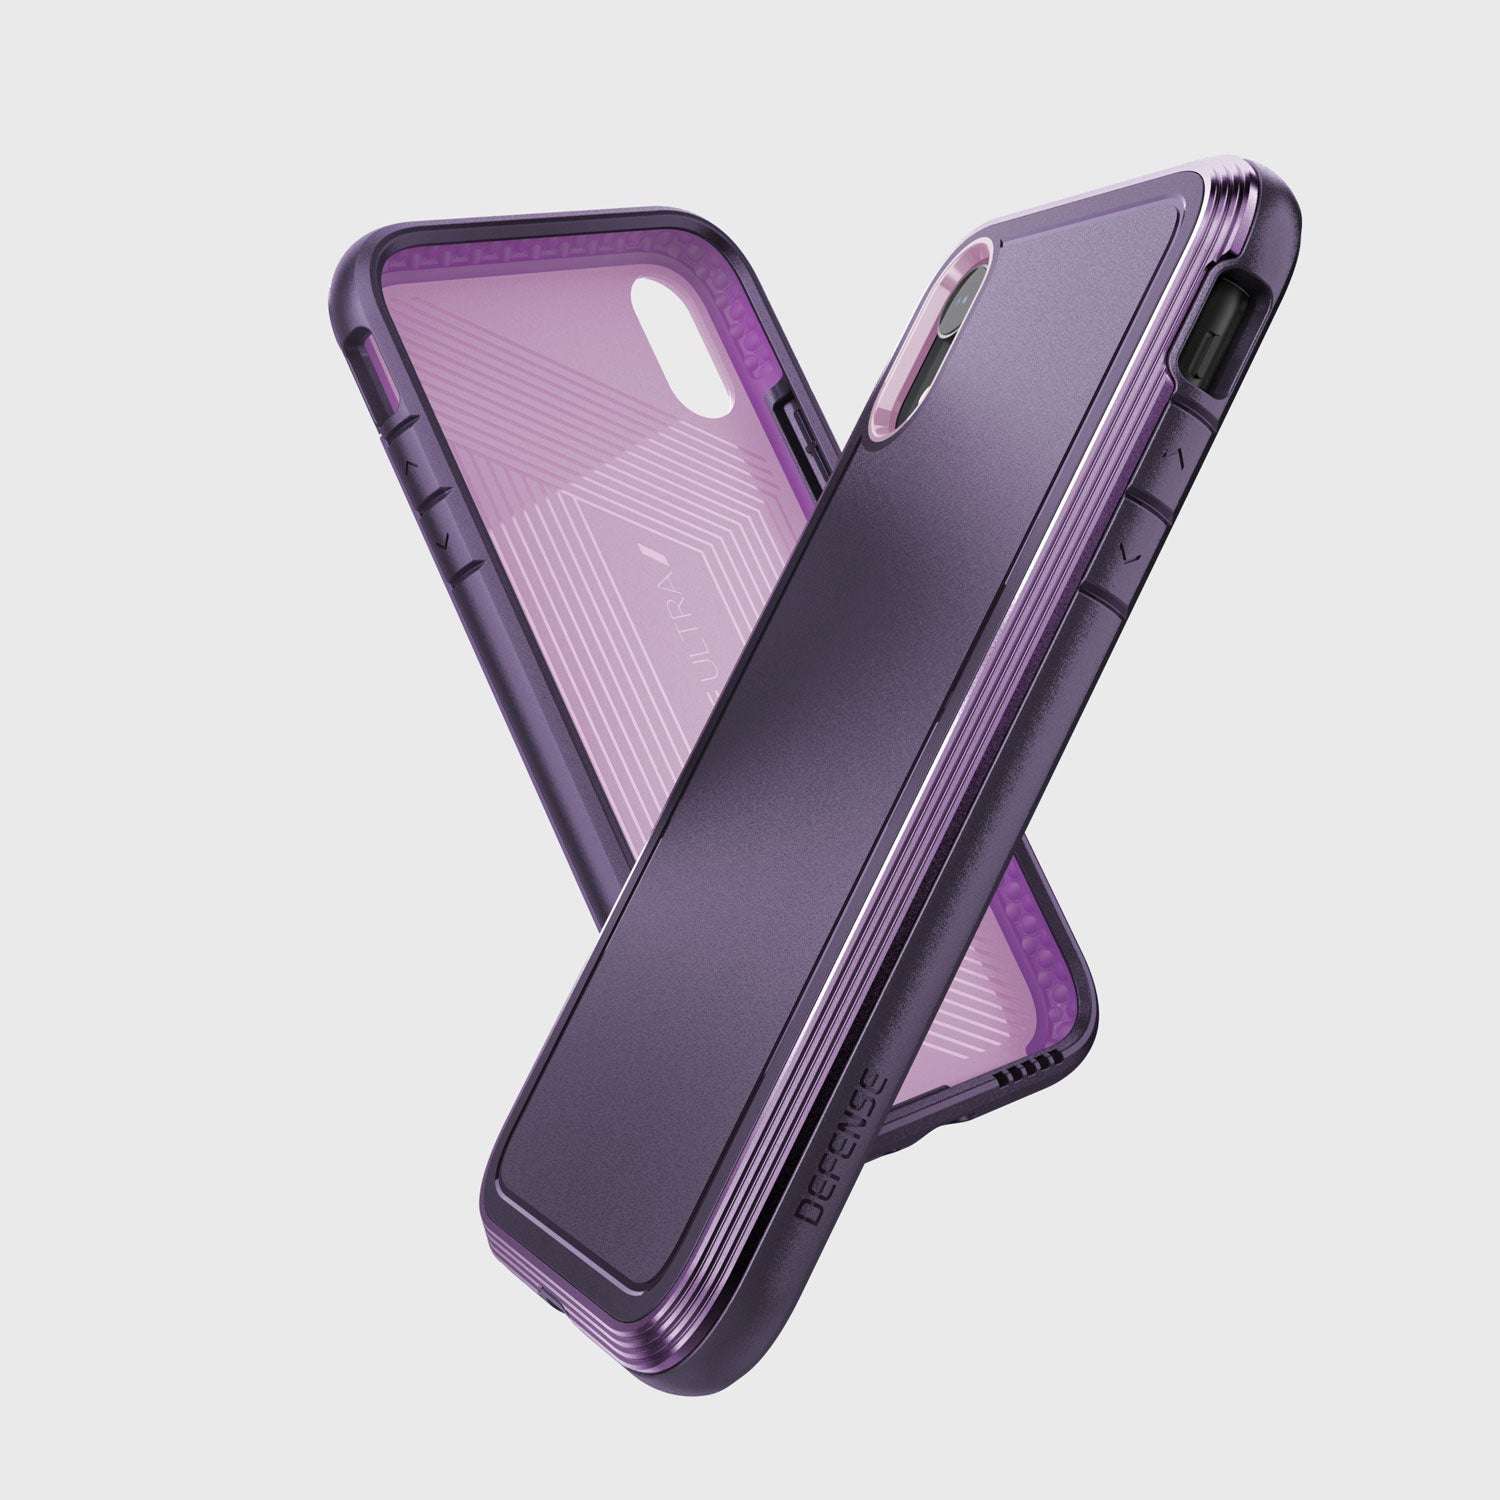 An iPhone XR case on a white background, offering device protection with the Raptic ULTRA case.